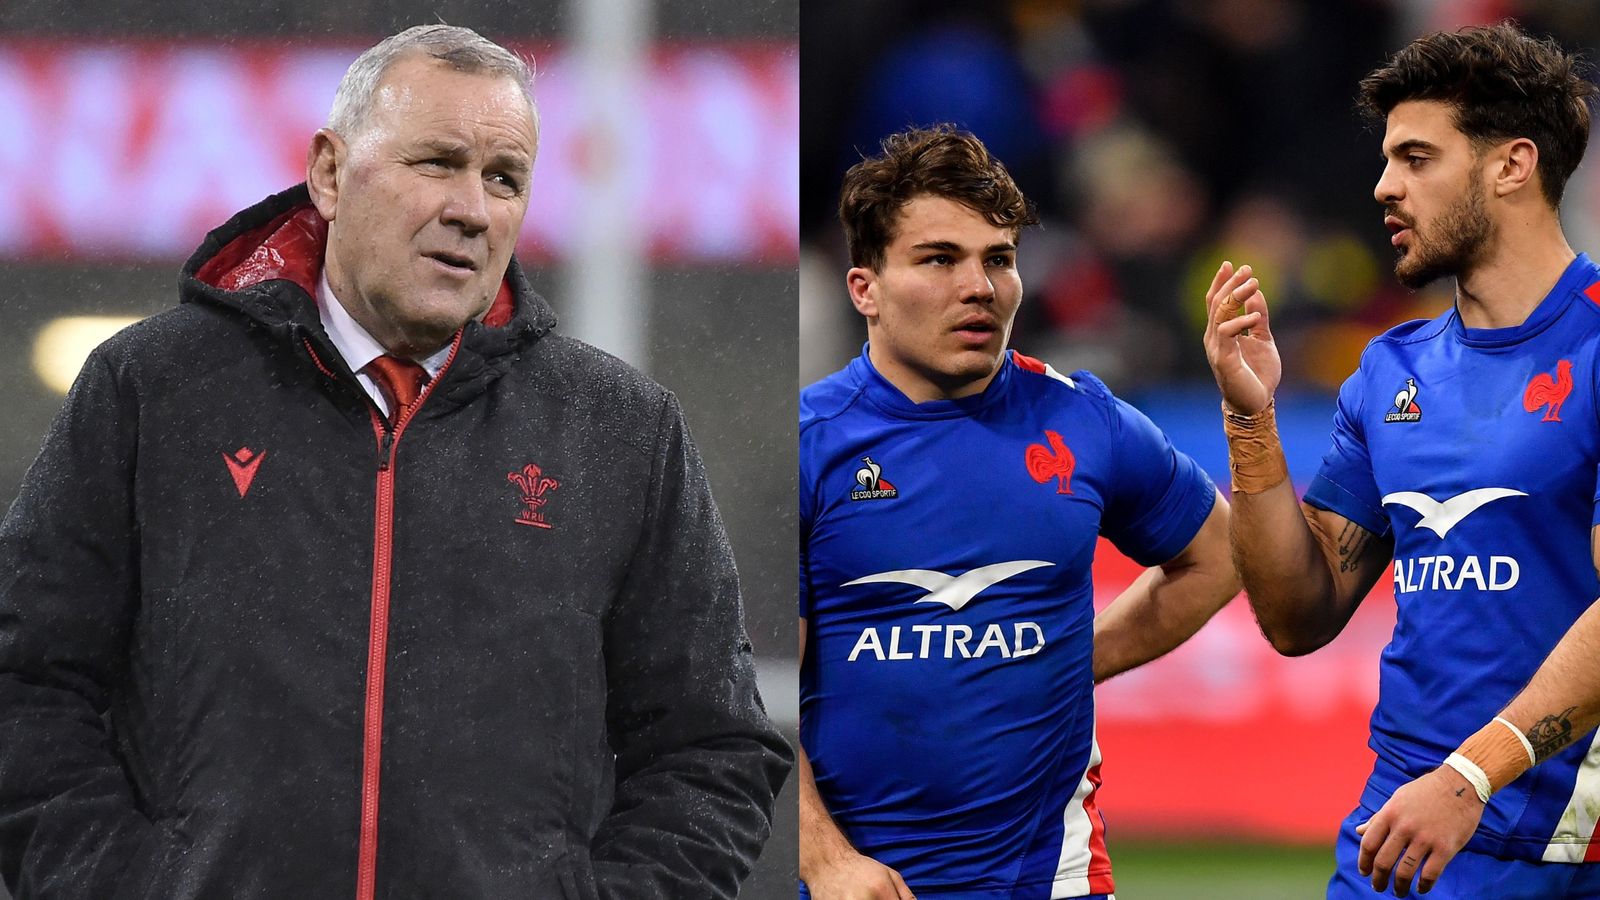 Wayne Pivac: Wales facing world’s in-form team in Friday’s Six Nations Test vs France